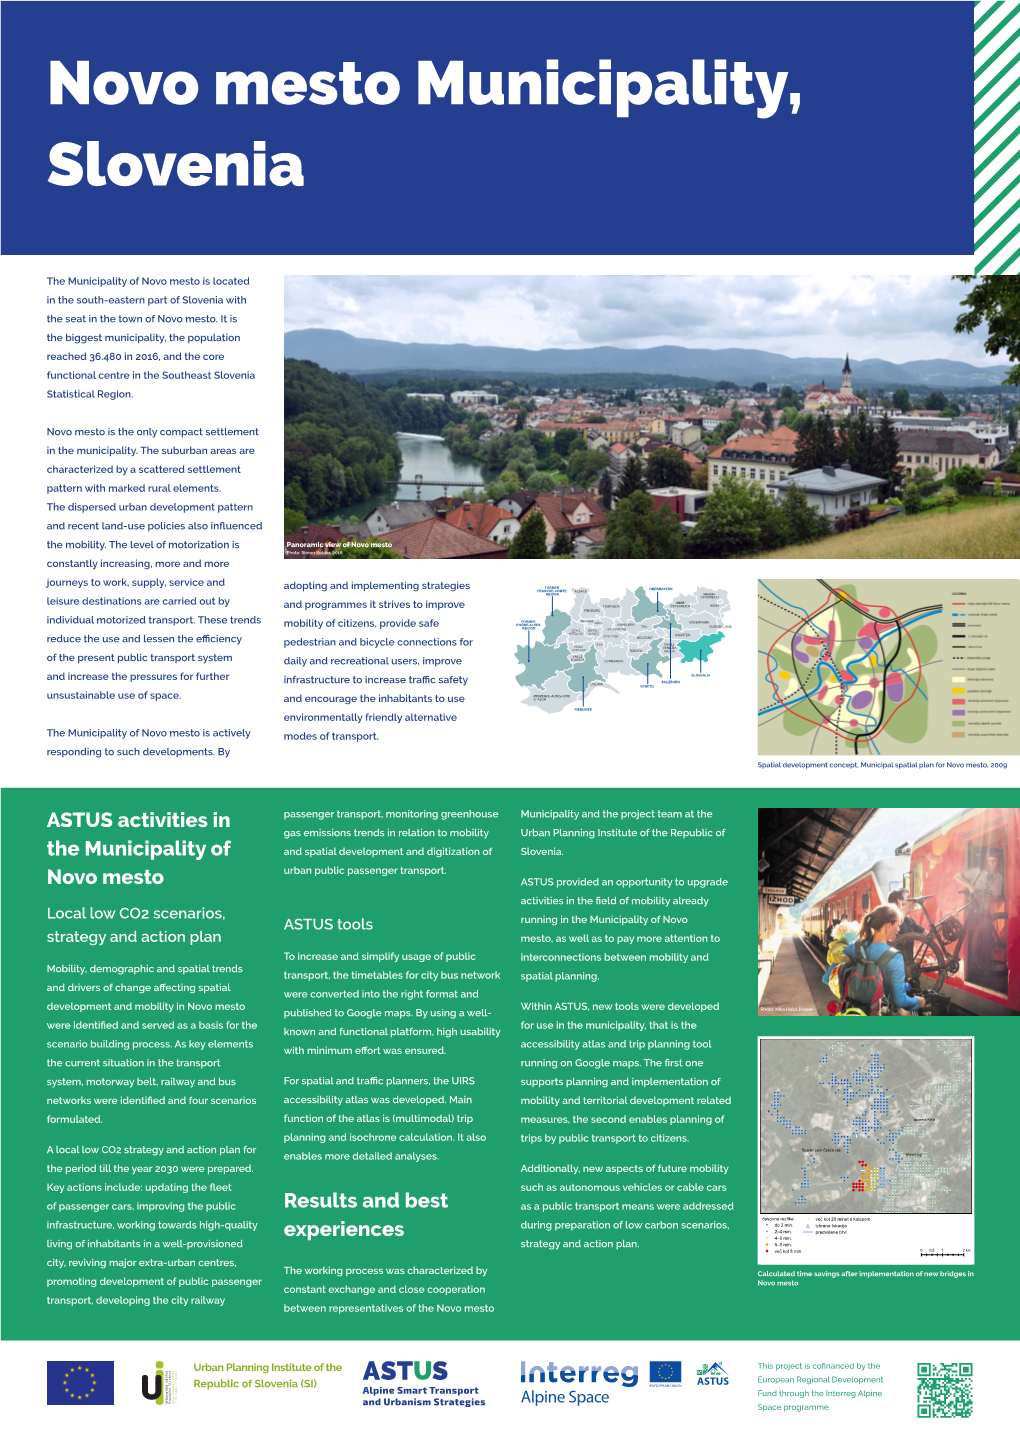 ASTUS Activities in the Municipality of Novo Mesto Results and Best Experiences